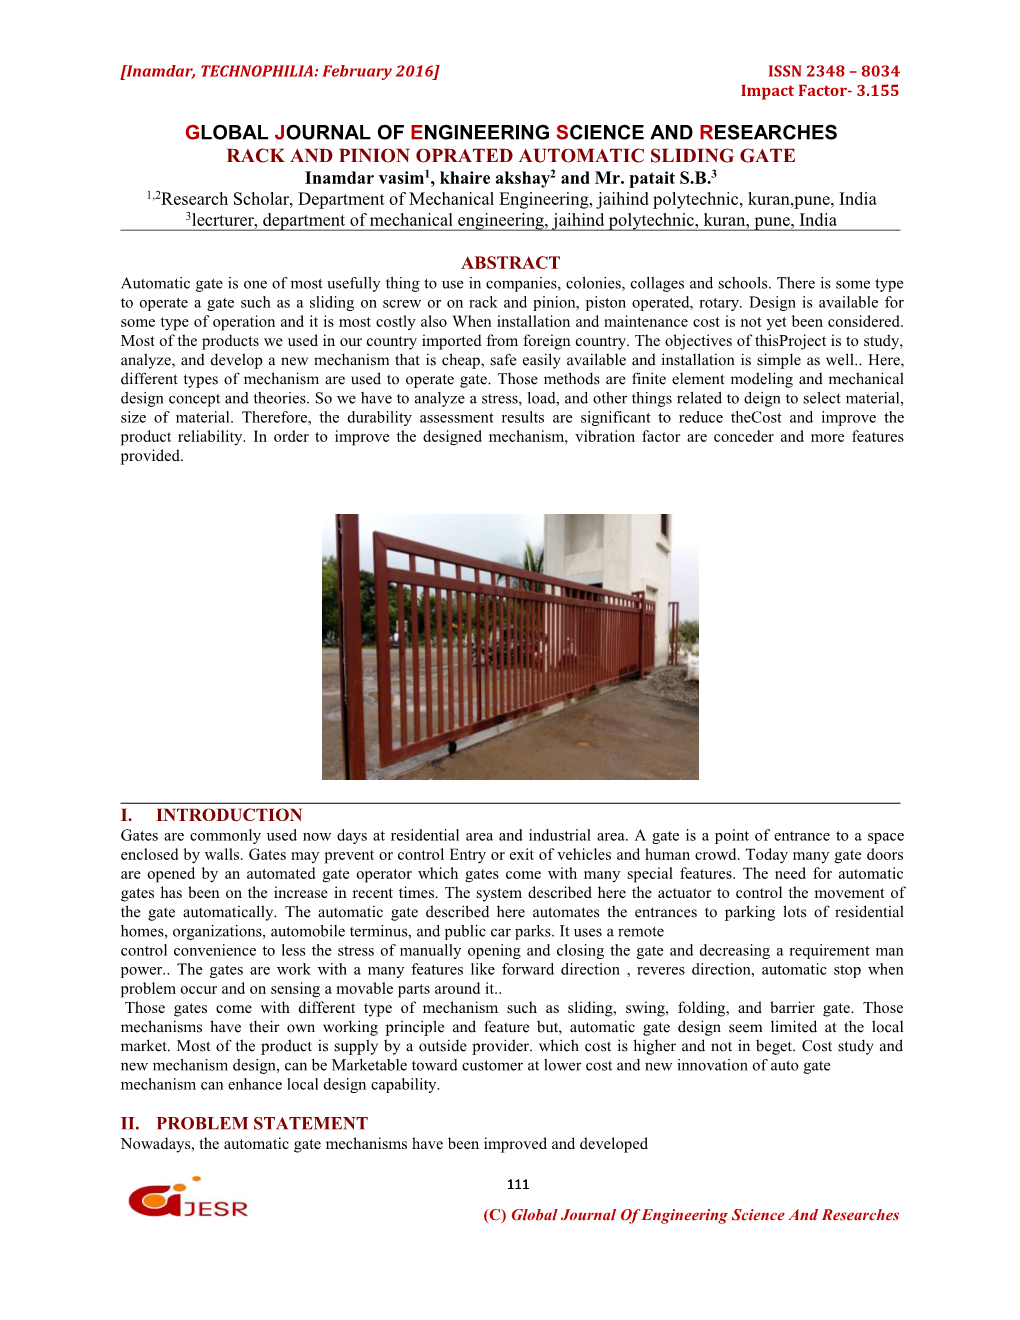 RACK and PINION OPRATED AUTOMATIC SLIDING GATE Inamdar Vasim1, Khaire Akshay2 and Mr